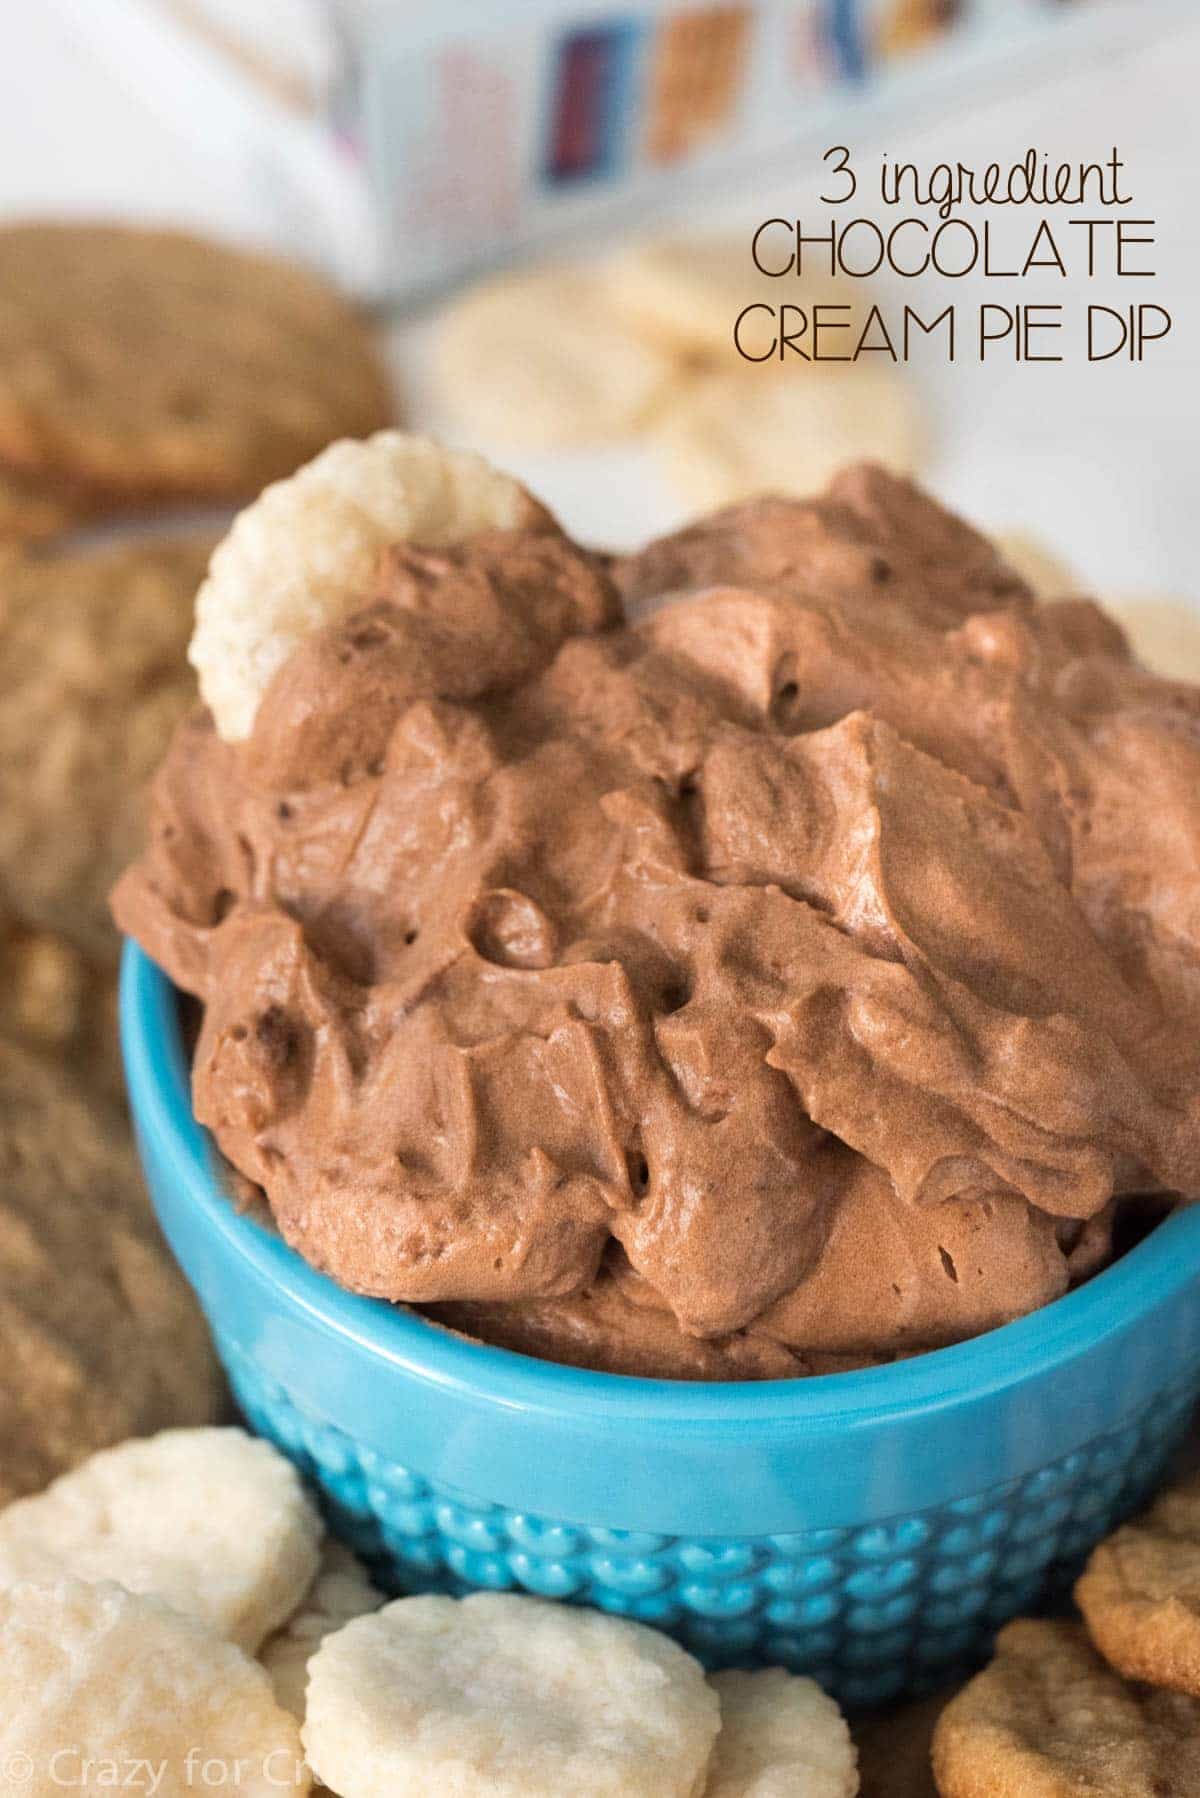 Chocolate Cream Pie Dip - it only has 3 ingredients! This EASY dip recipe is served with pie crust dippers and cookies for a fun party treat.